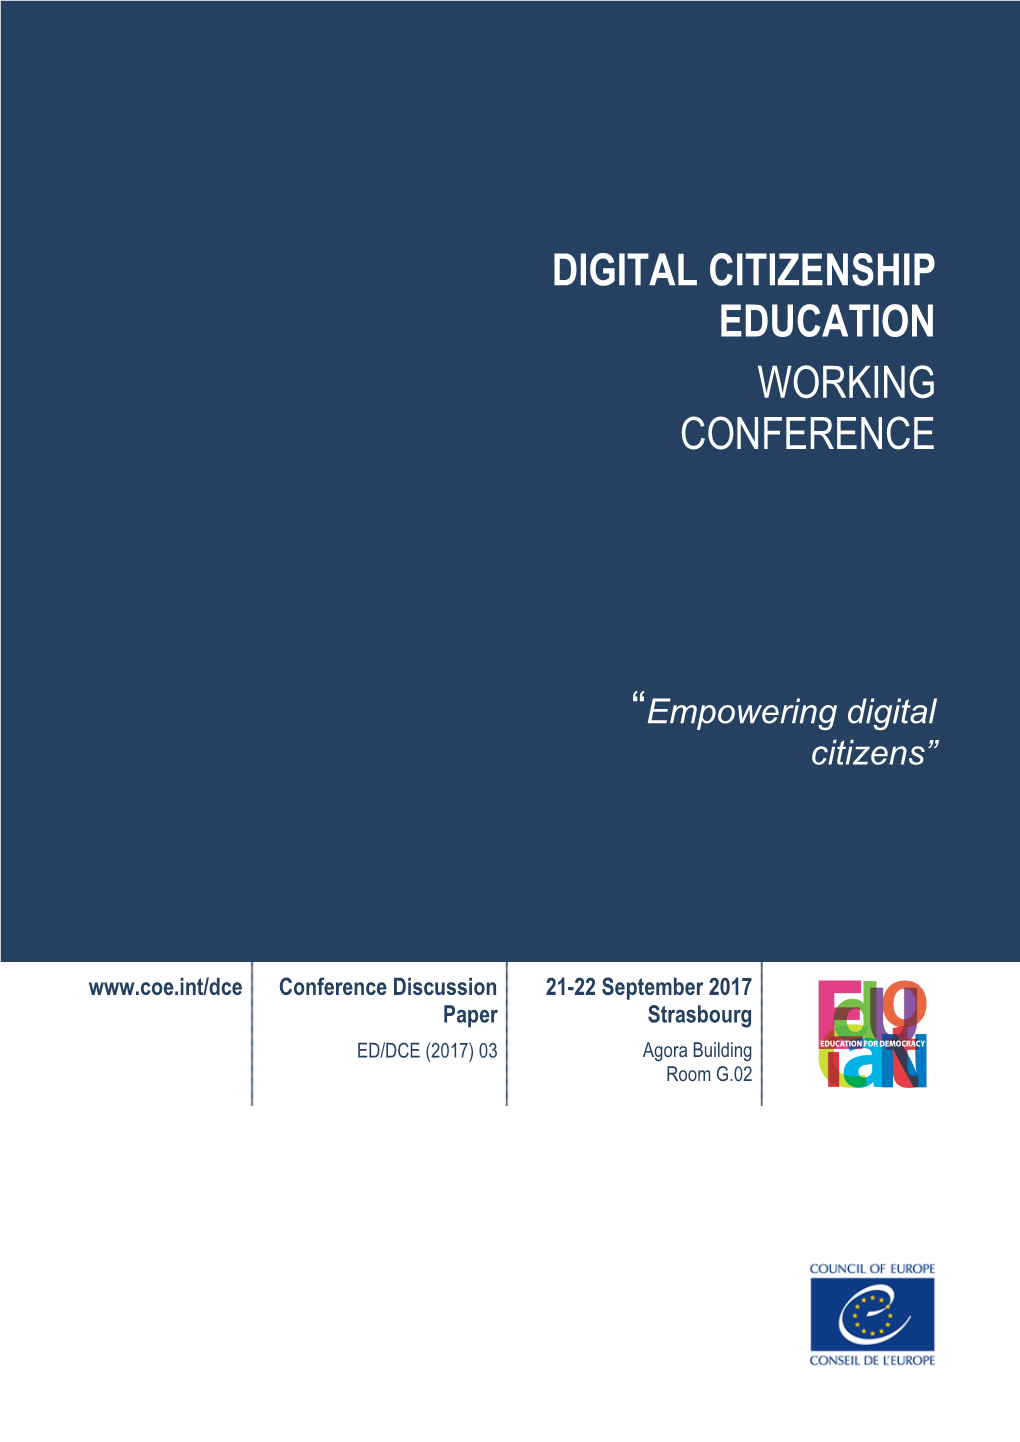 Digital Citizenship Education Working Conference